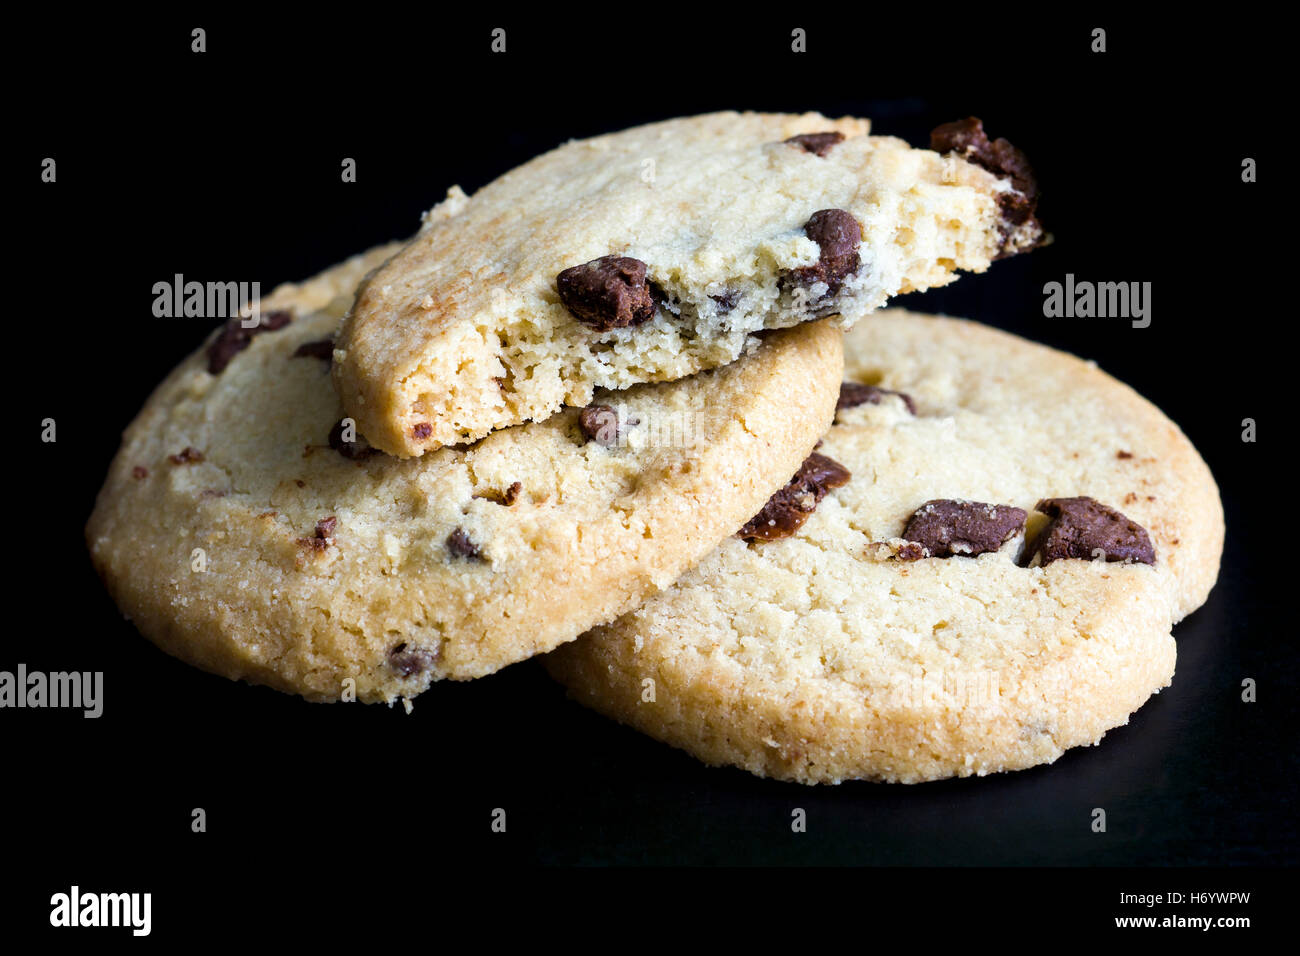 Round chocolate chip shortbread biscuits. On black. Stock Photo